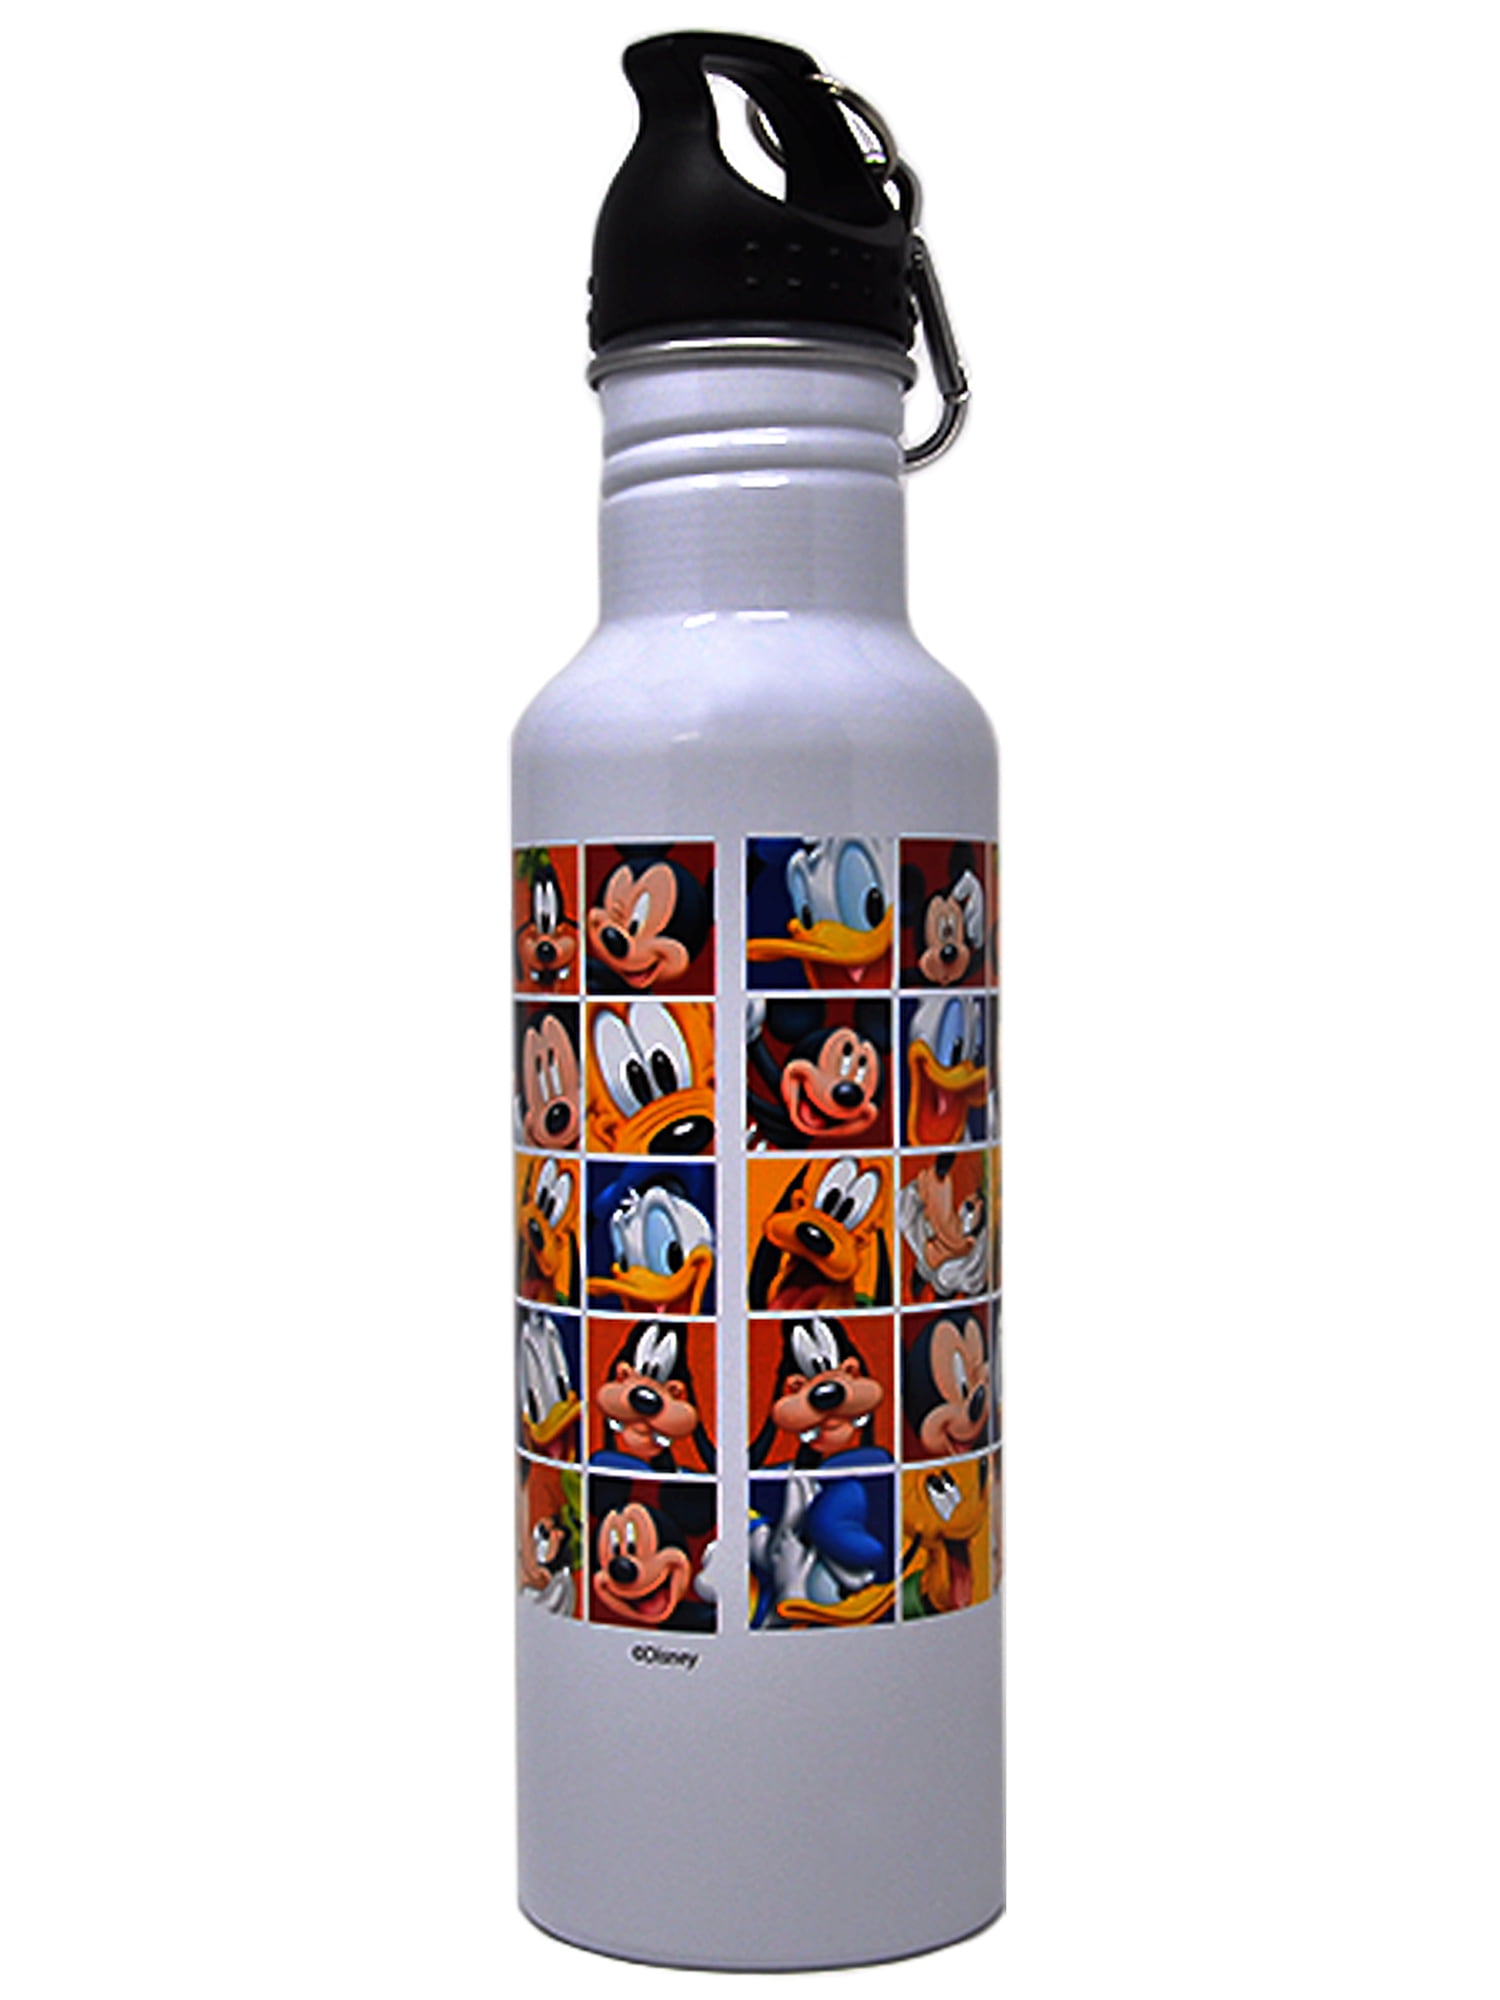 Disney Water Bottle - Mickey and Friends Welcome Friends!